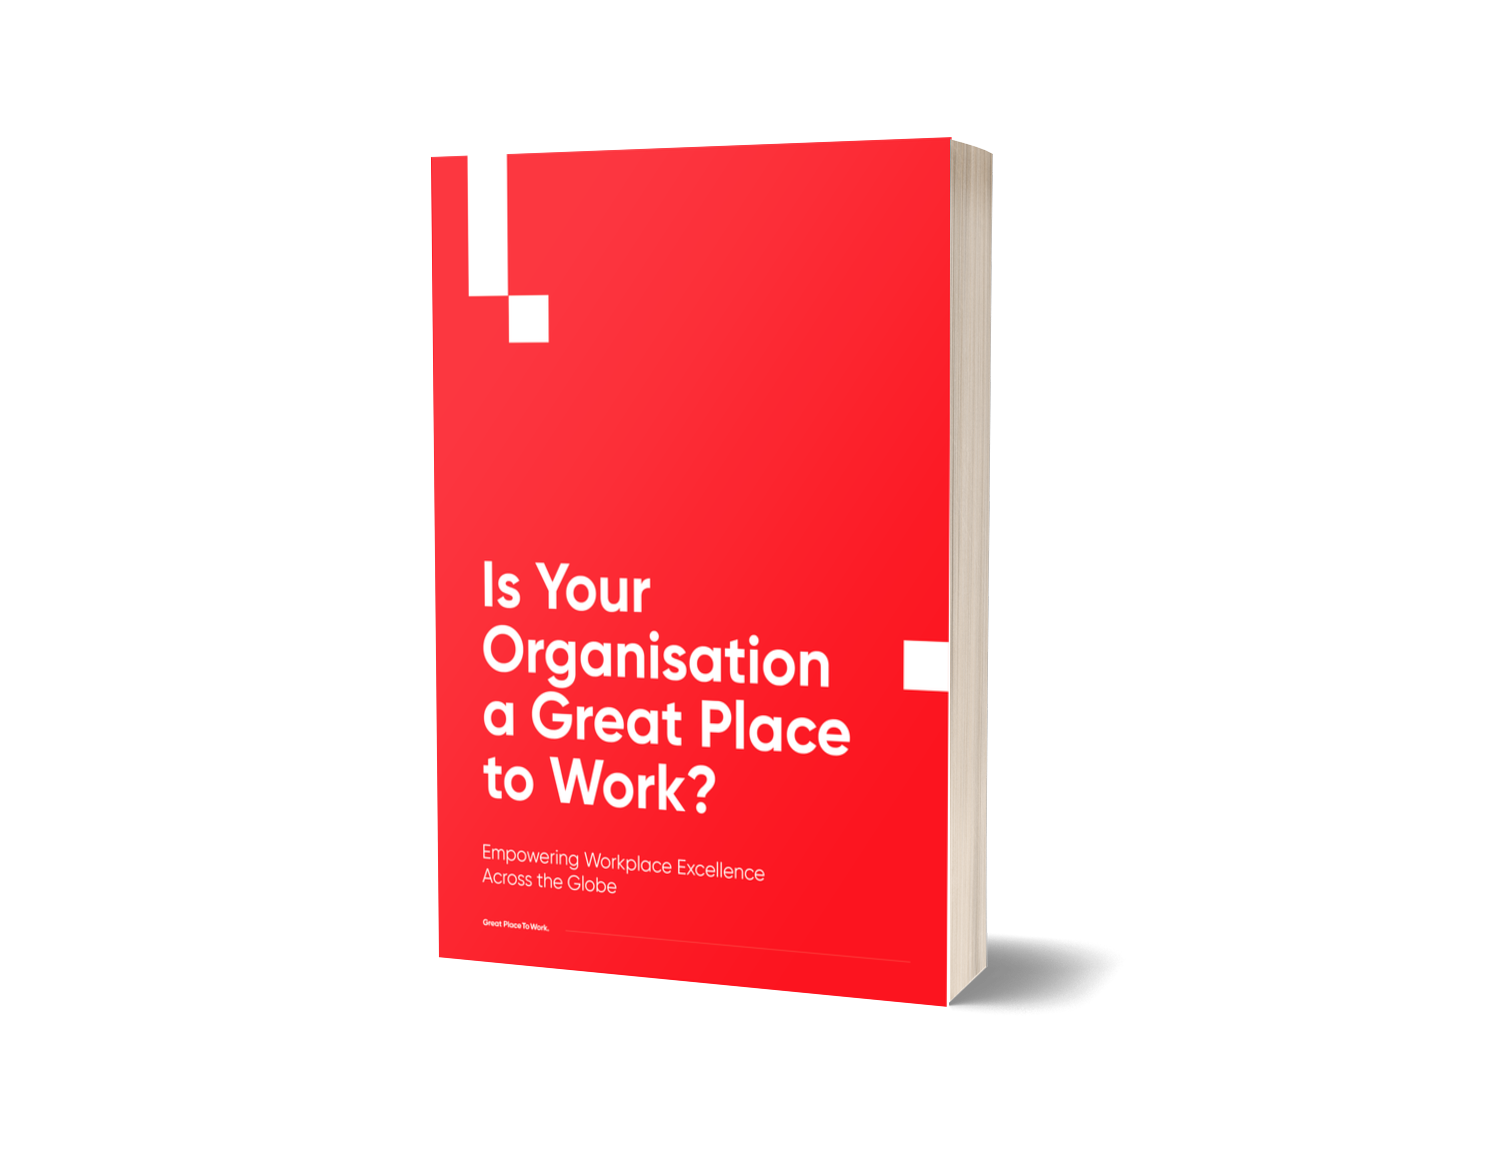 Is Your Organisation a Great Place to Work?